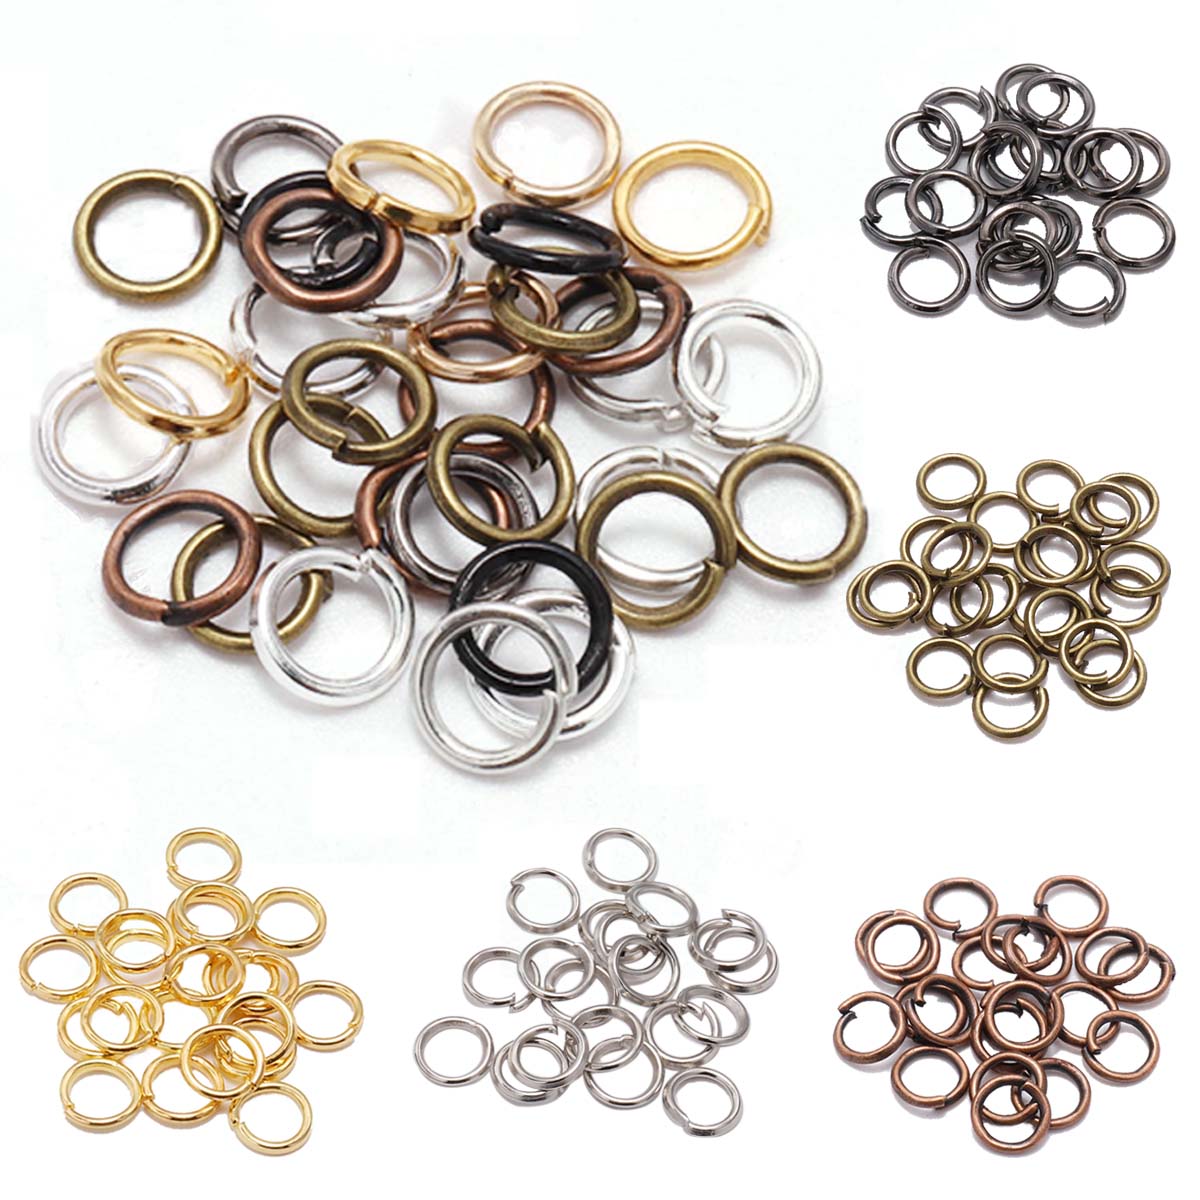 200pcs/lot 3/4/5/6/7/8/10mm Stainless Steel Diy Jewelry Findings